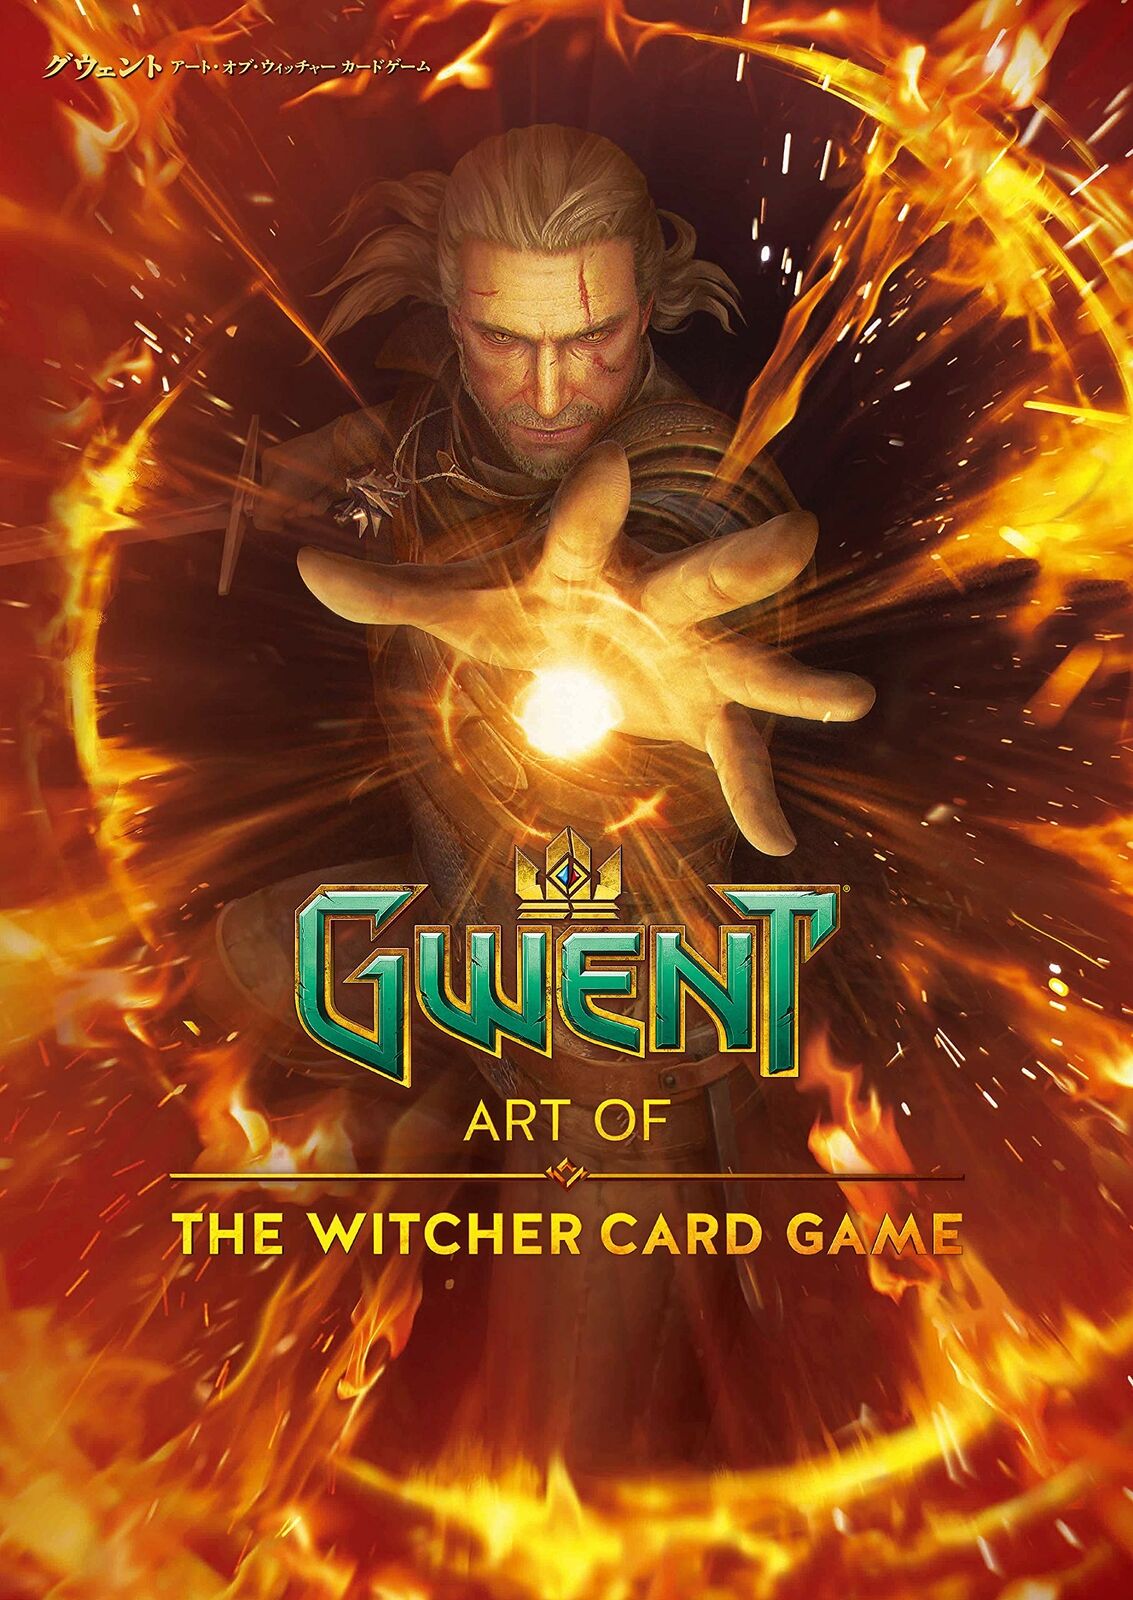 GWENT Art of The Witcher Card Game / Illustration Works Collection Book Japan